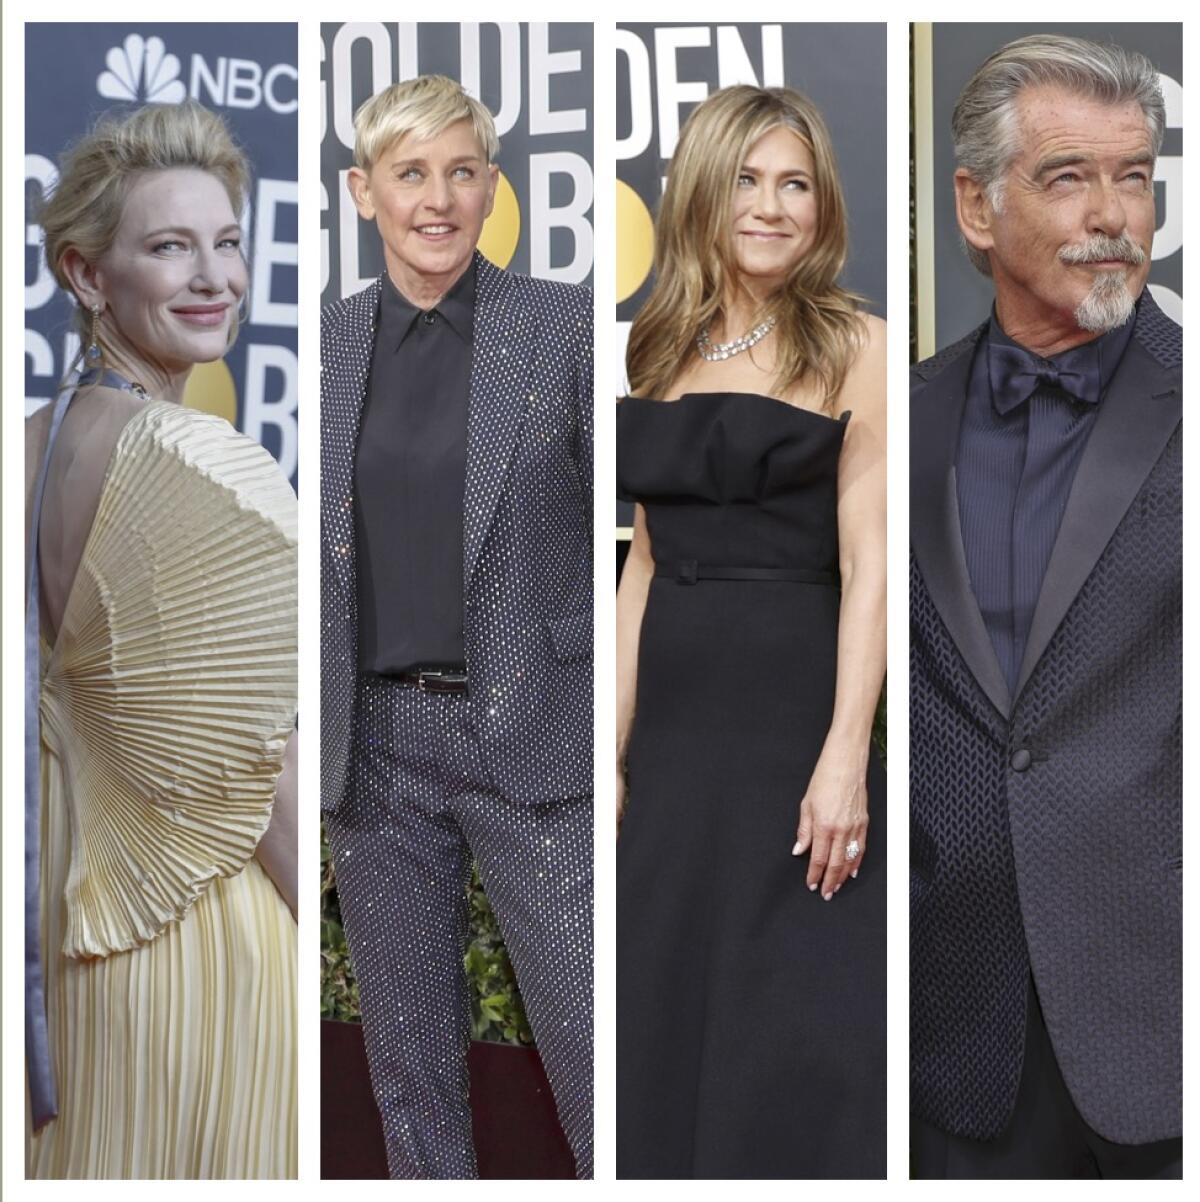 At the Golden Globes, Cate Blanchett, from left, Ellen DeGeneres, Jennifer Aniston and Pierce Brosnan. At Sunday night's ceremony, all brought up the bush fires in Australia.